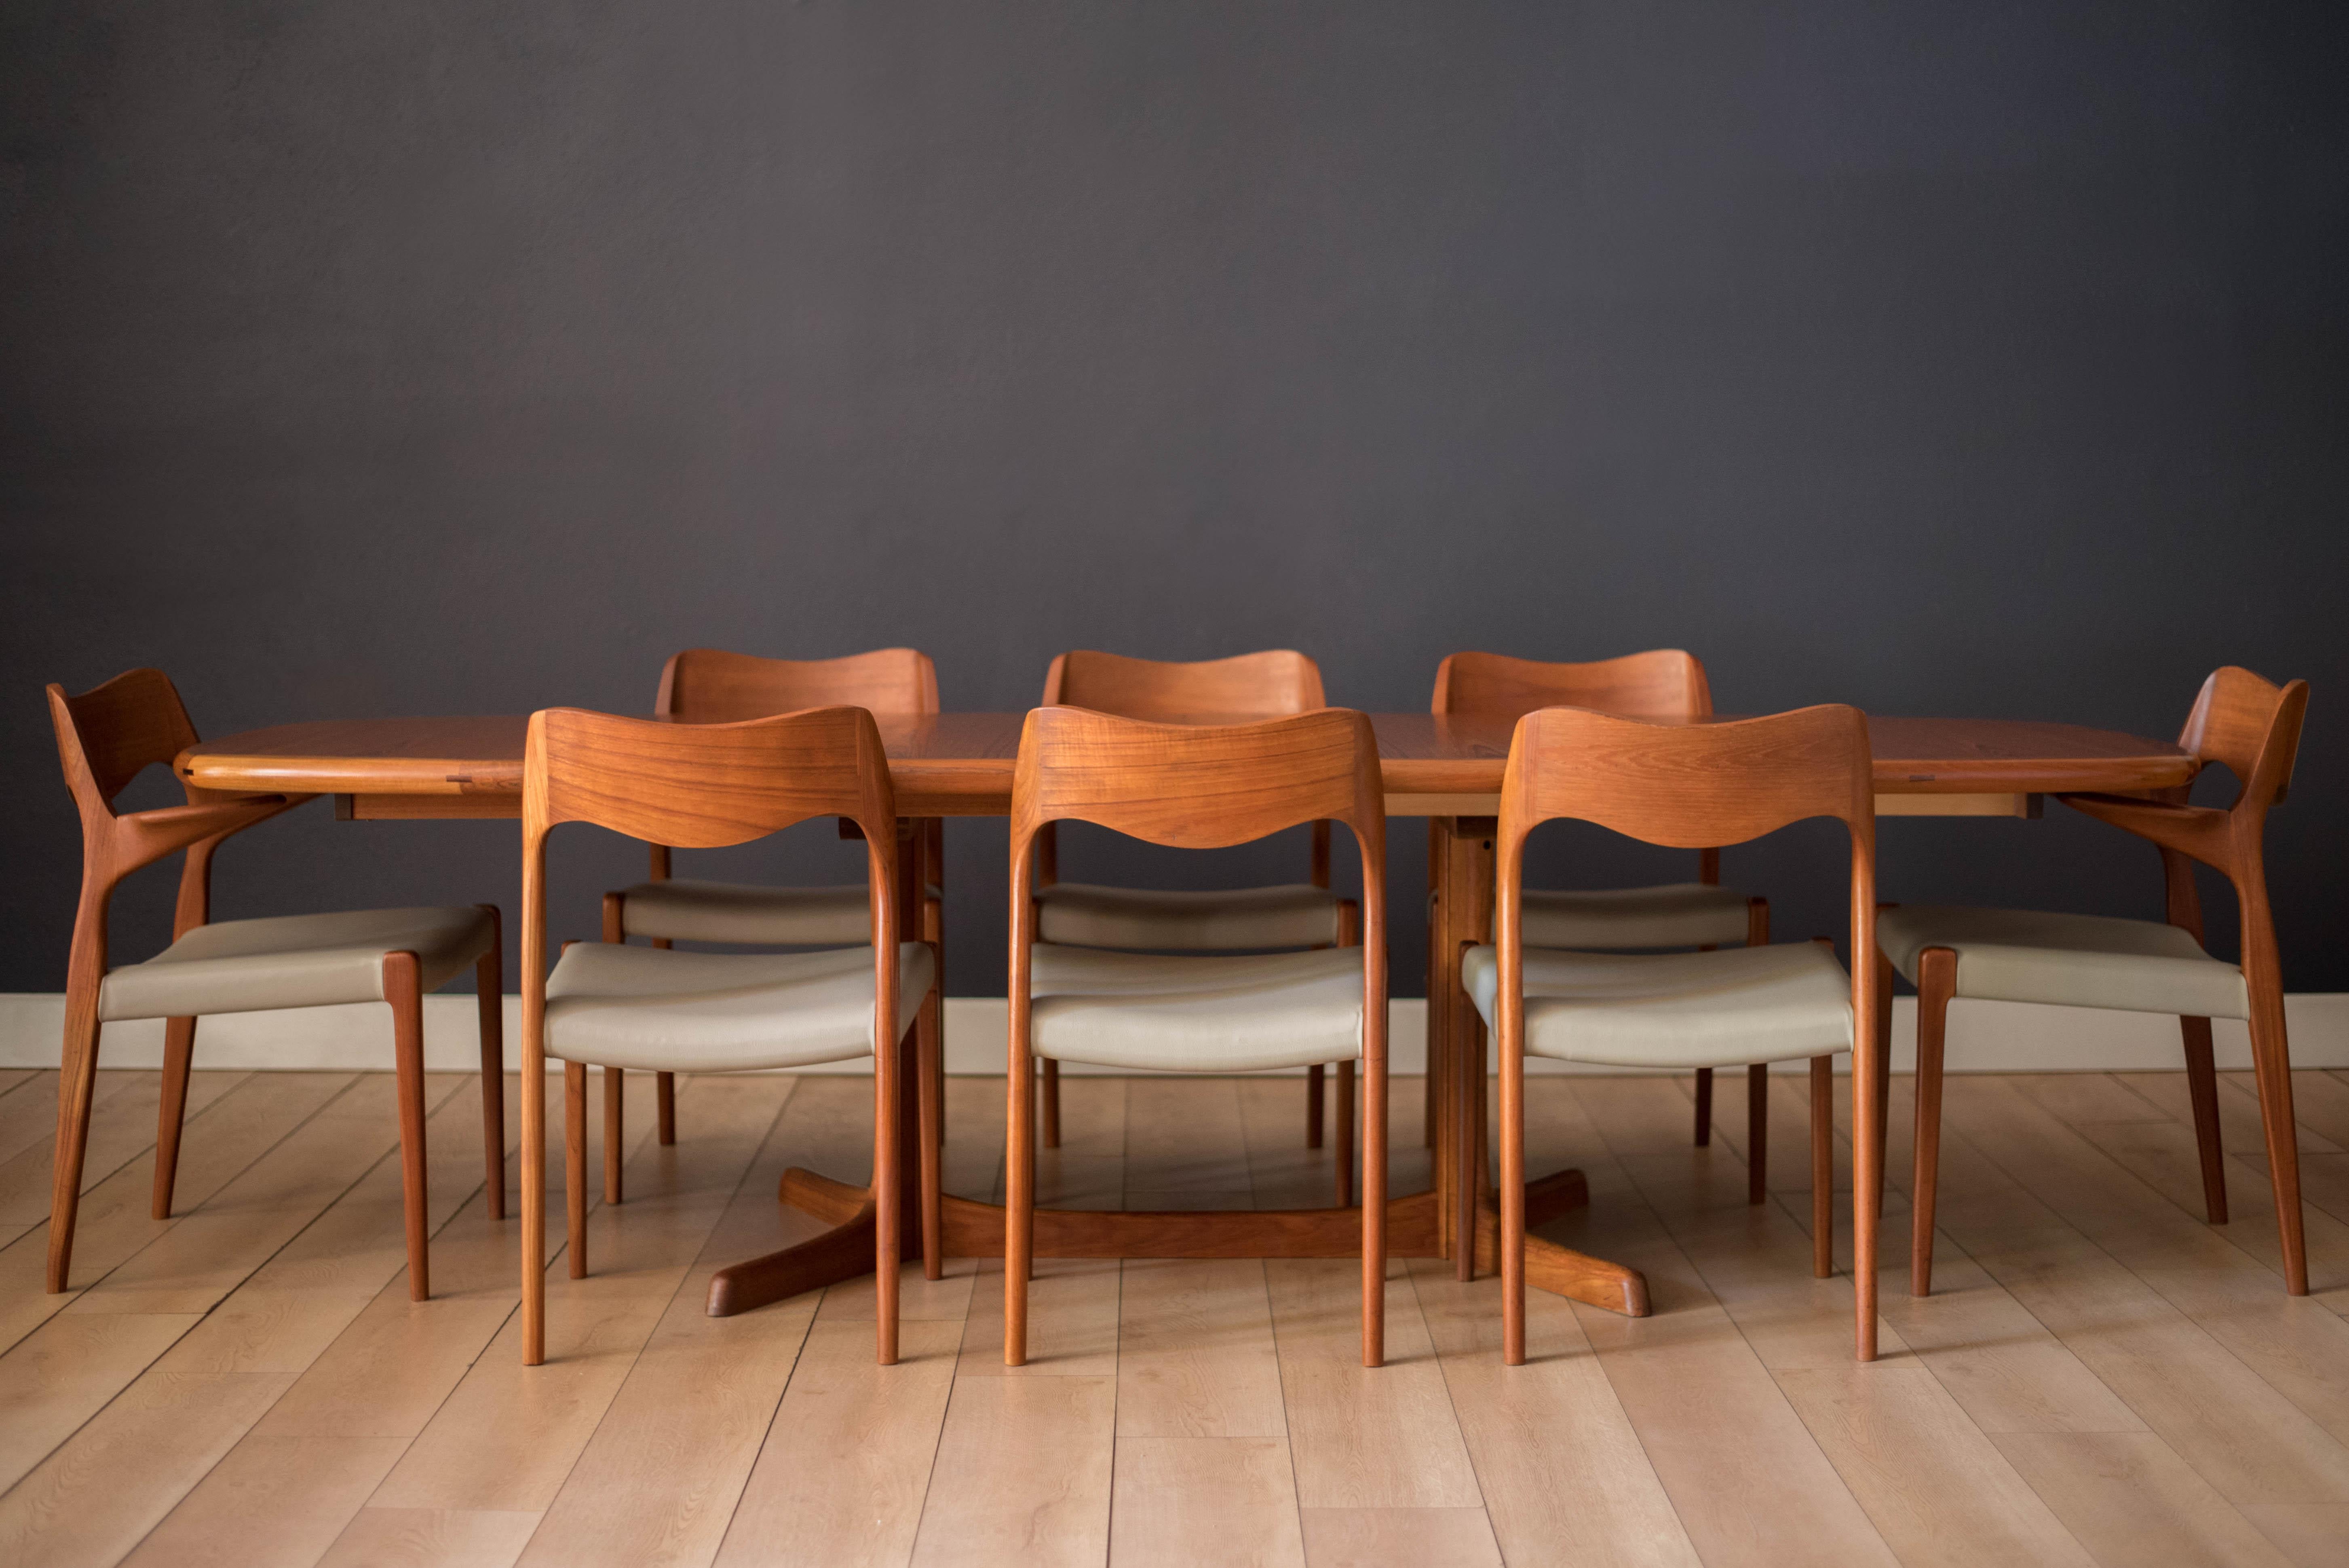 Mid-Century Modern round oval dining table in teak with rosewood accents by Rasmus. This piece features a convenient double pedestal style base that allow chairs to easily tuck in and seat up to 10 guests comfortably. Includes two extendable leaves